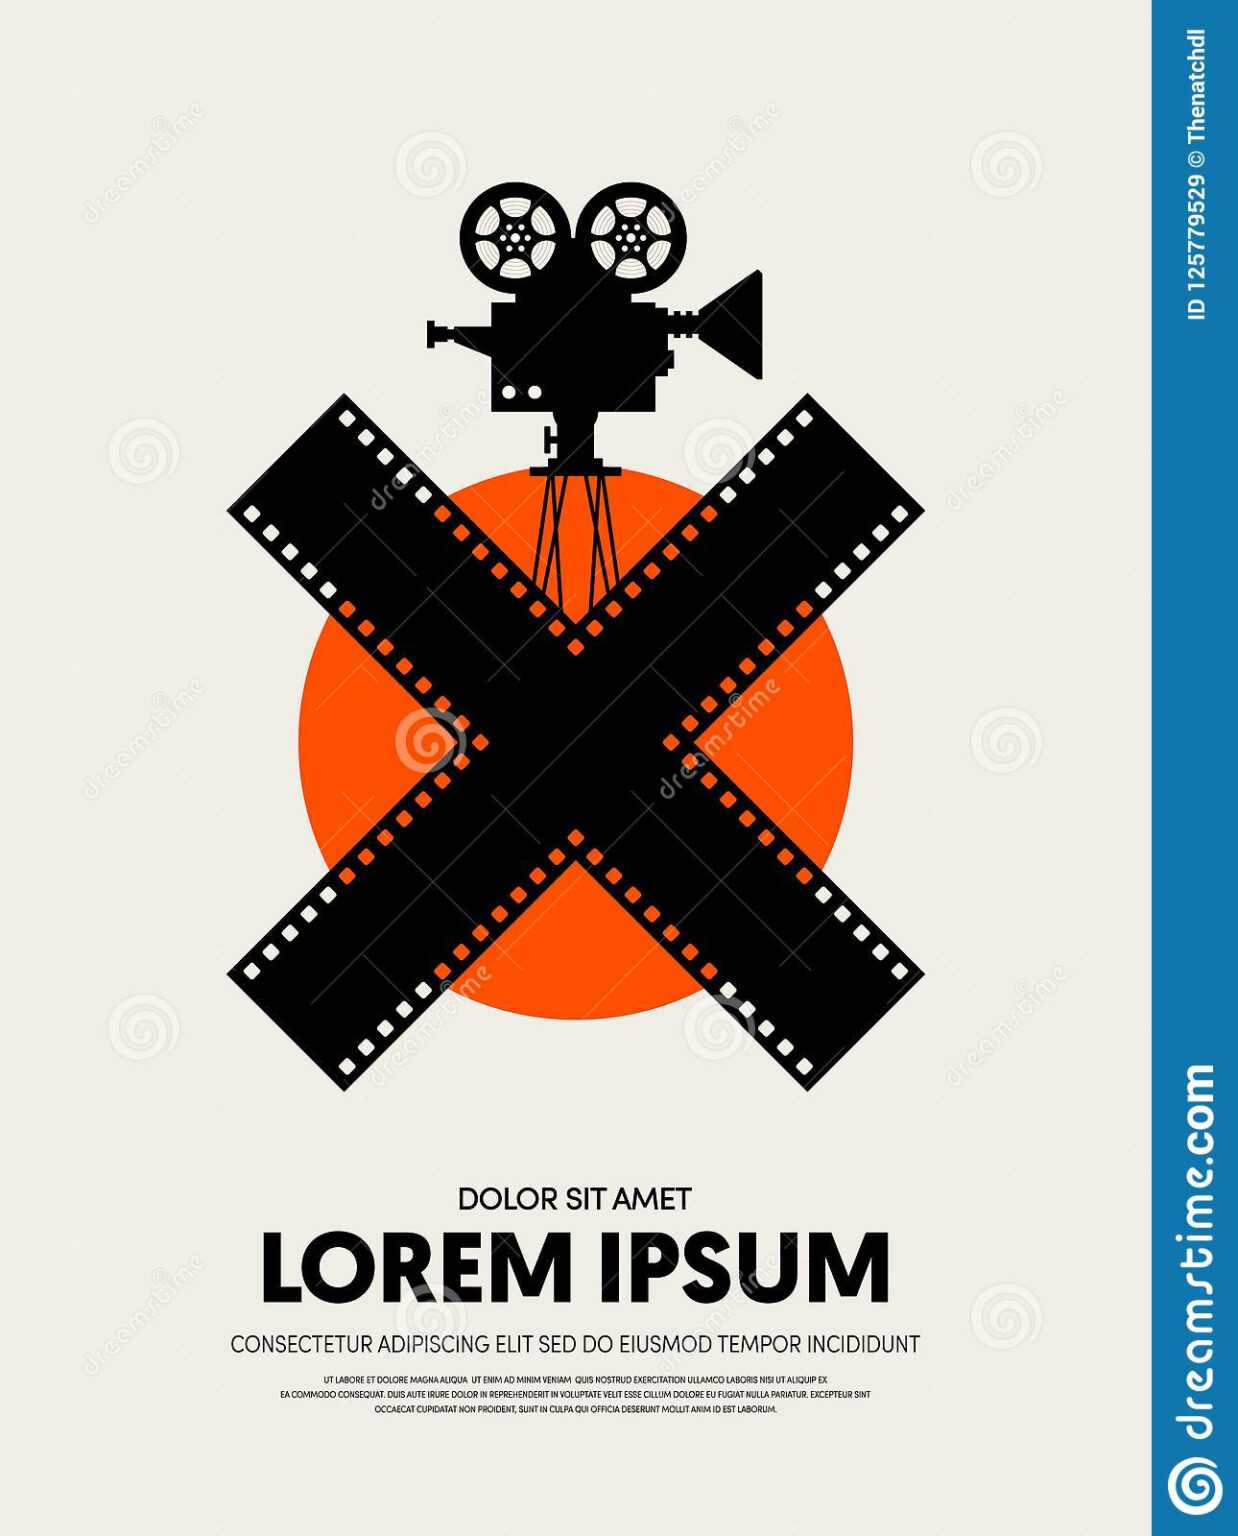 movie-and-film-festival-poster-template-design-stock-within-film